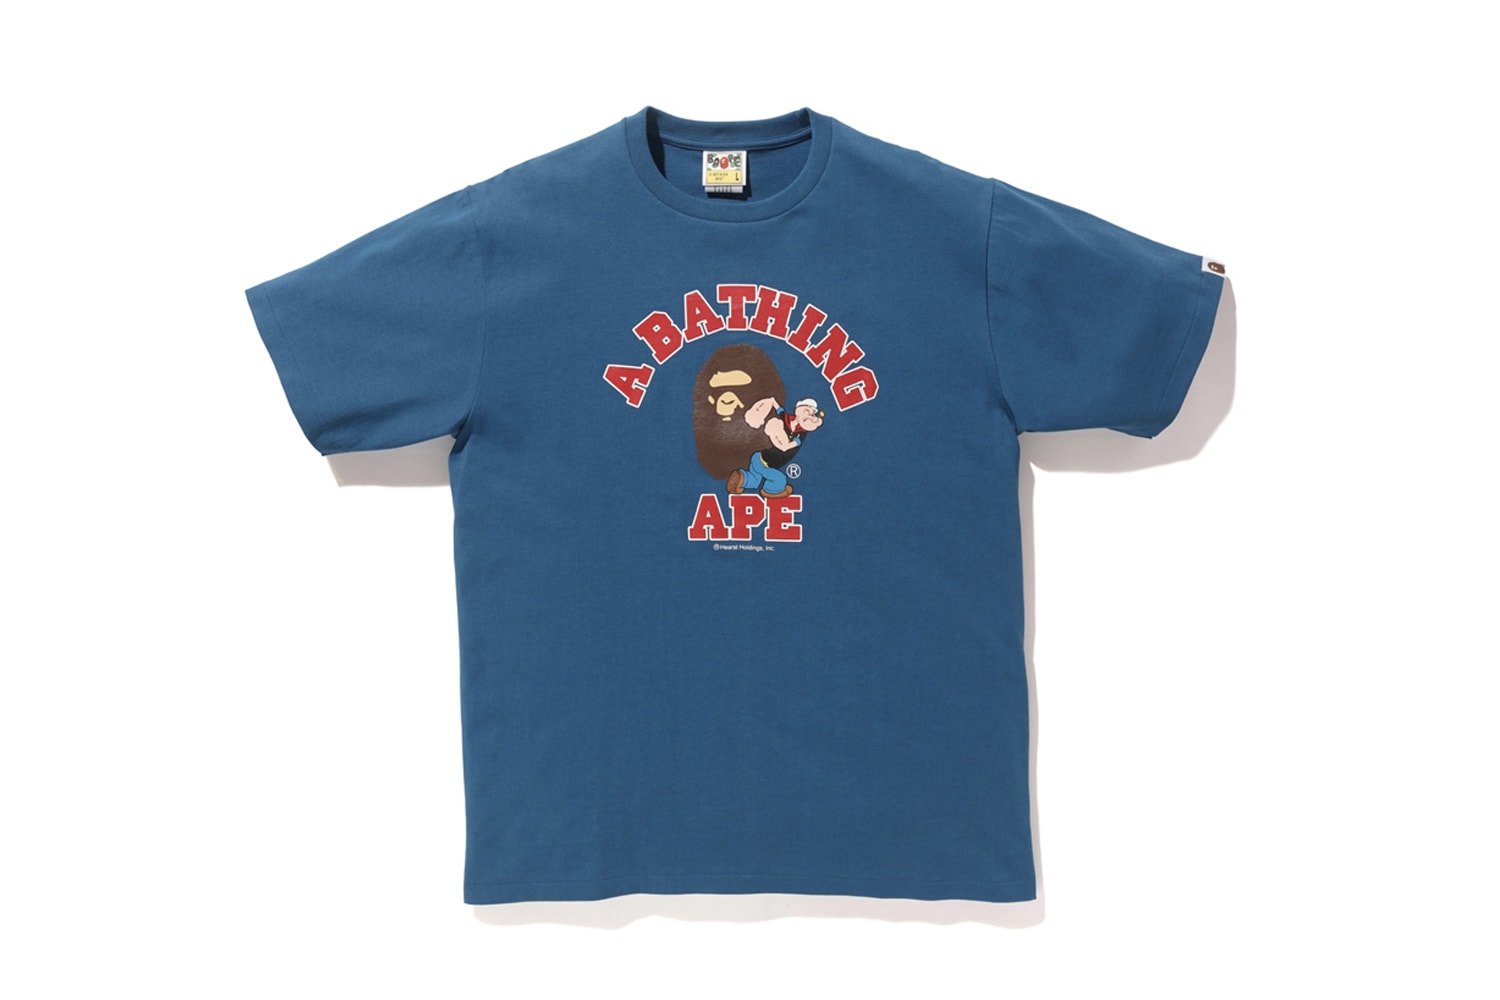 BAPE x Popeye 2018 Collection T-Shirts Hoodies Accessories Tote Bags Keychains Clocks Graphic Cartoon Cominc